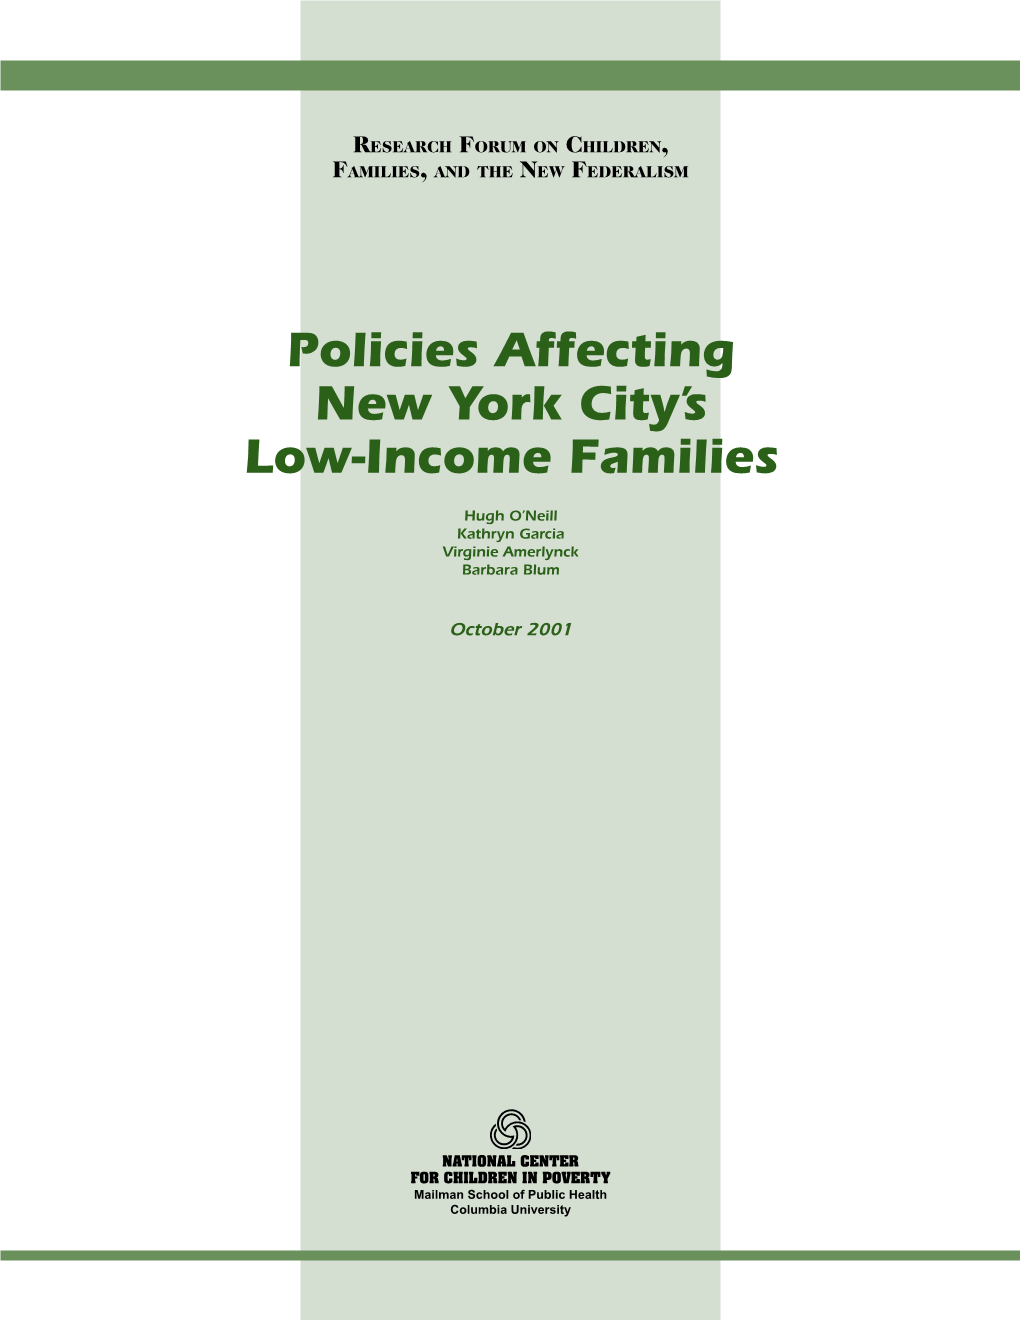 Policies Affecting New York City's Low-Income Families